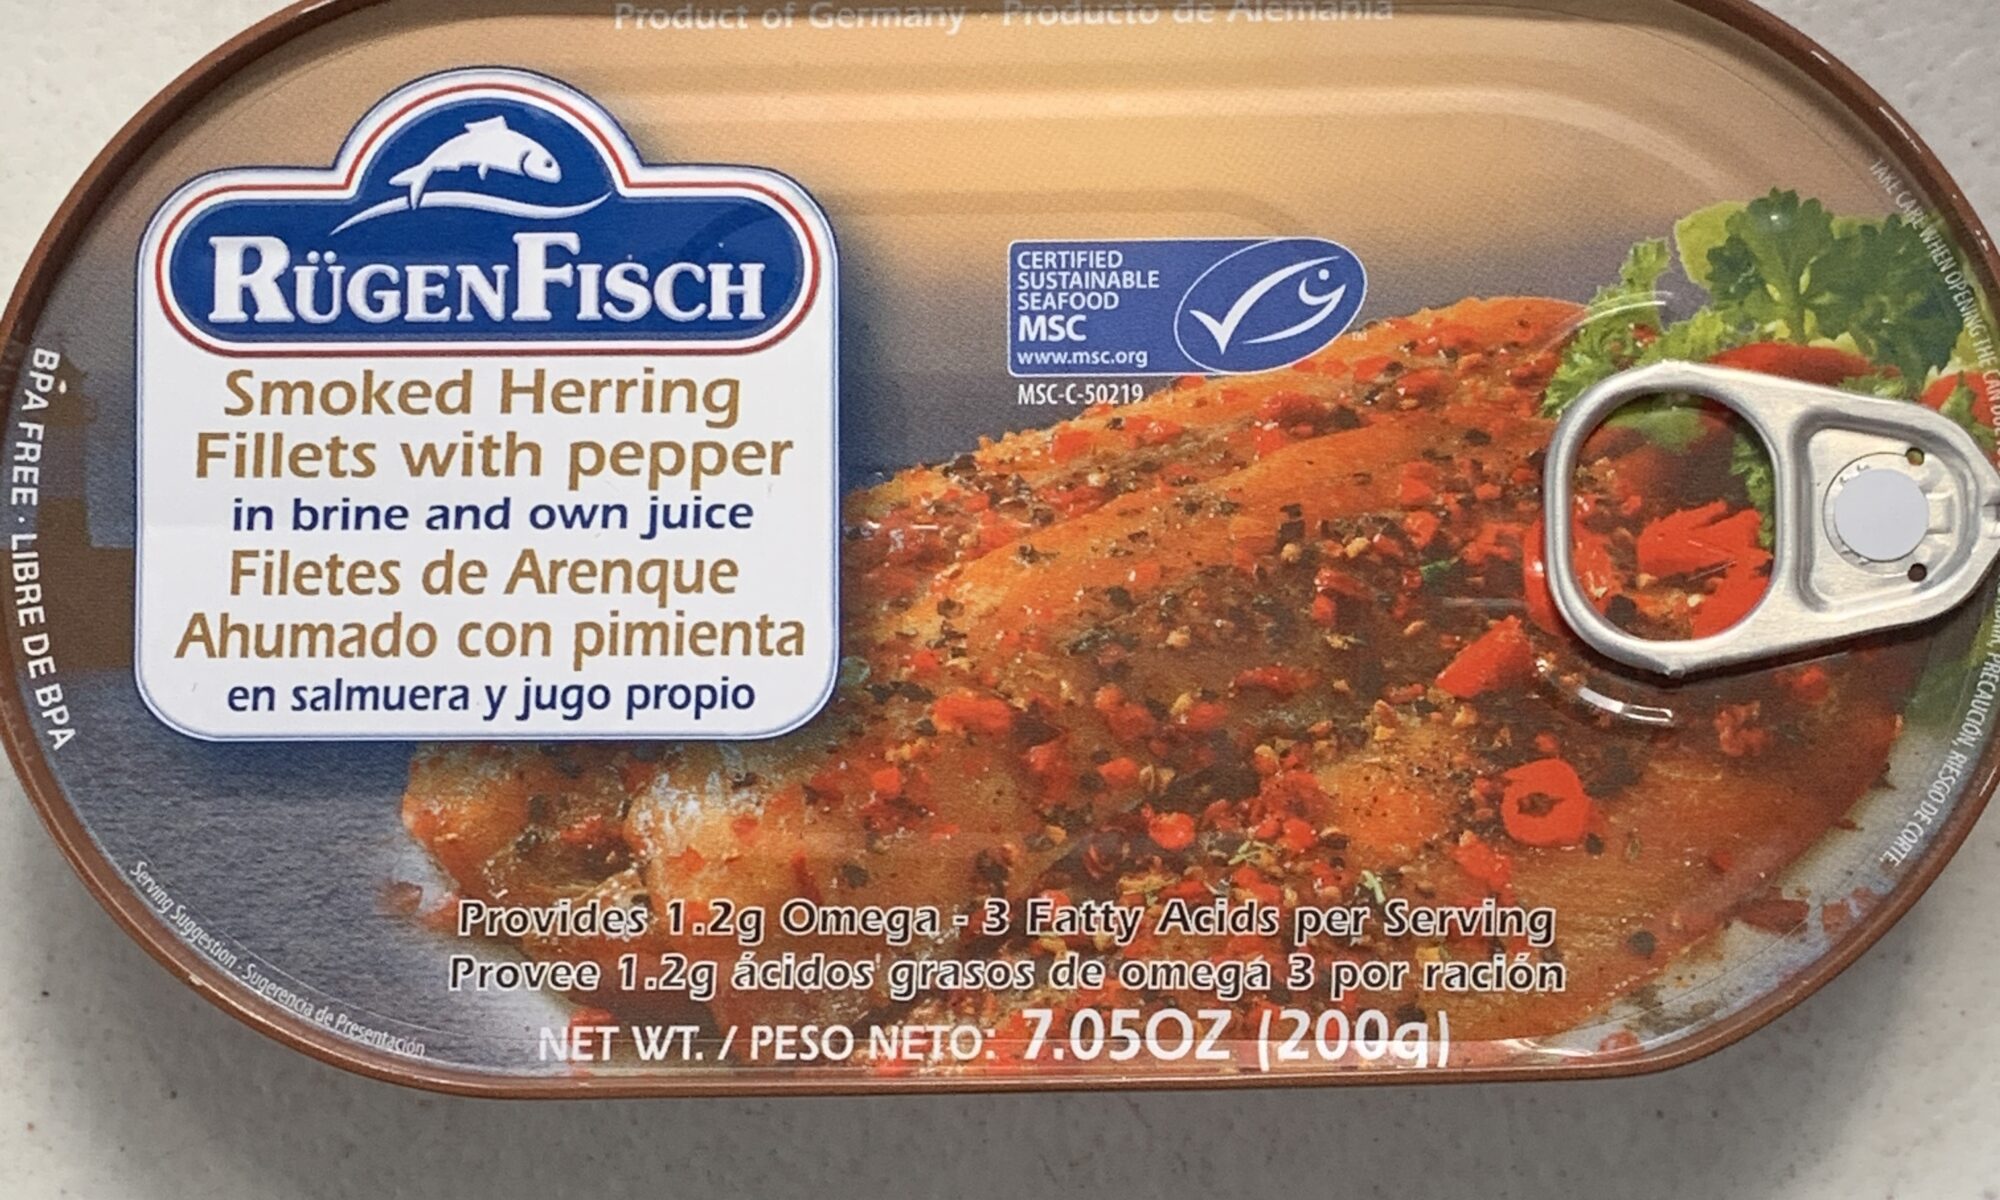 Image of the front of a tin of Rügen Fisch Smoked Herring Fillets with Pepper, in Brine and Own Juice